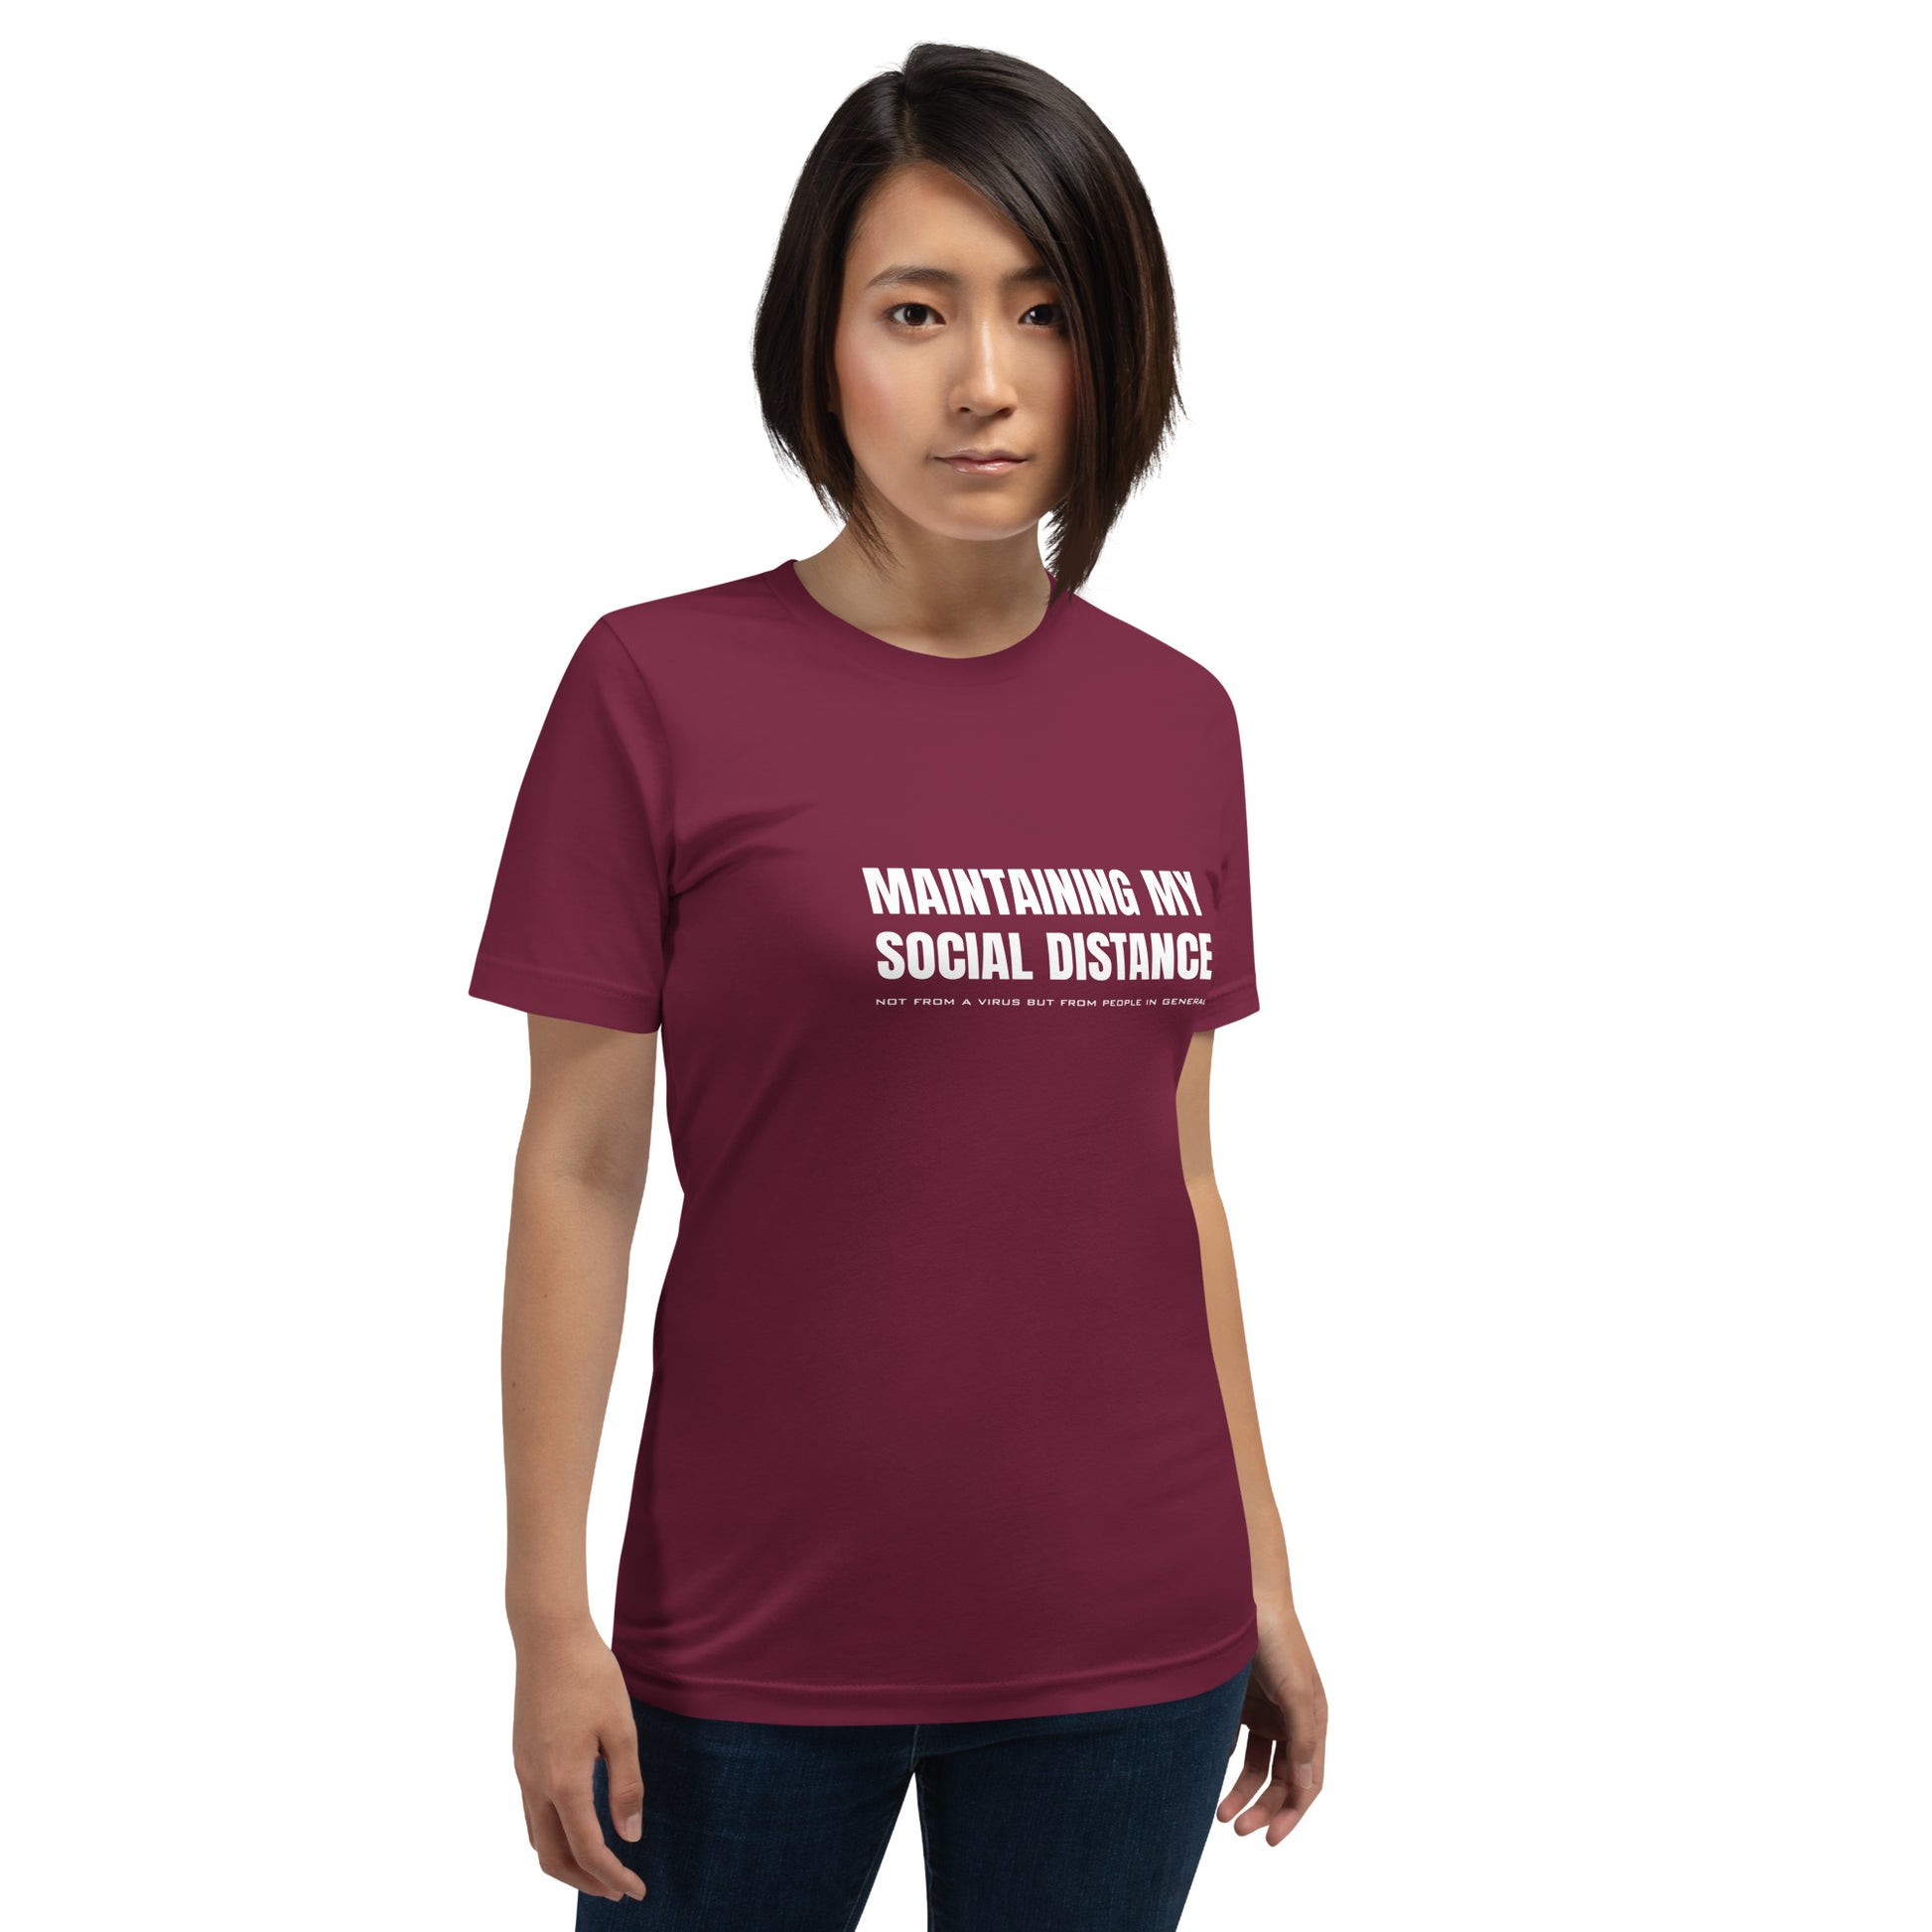 A model wearing a maroon t-shirt with white graphic: "MAINTAINING MY SOCIAL DISTANCE not from a virus but from people in general"